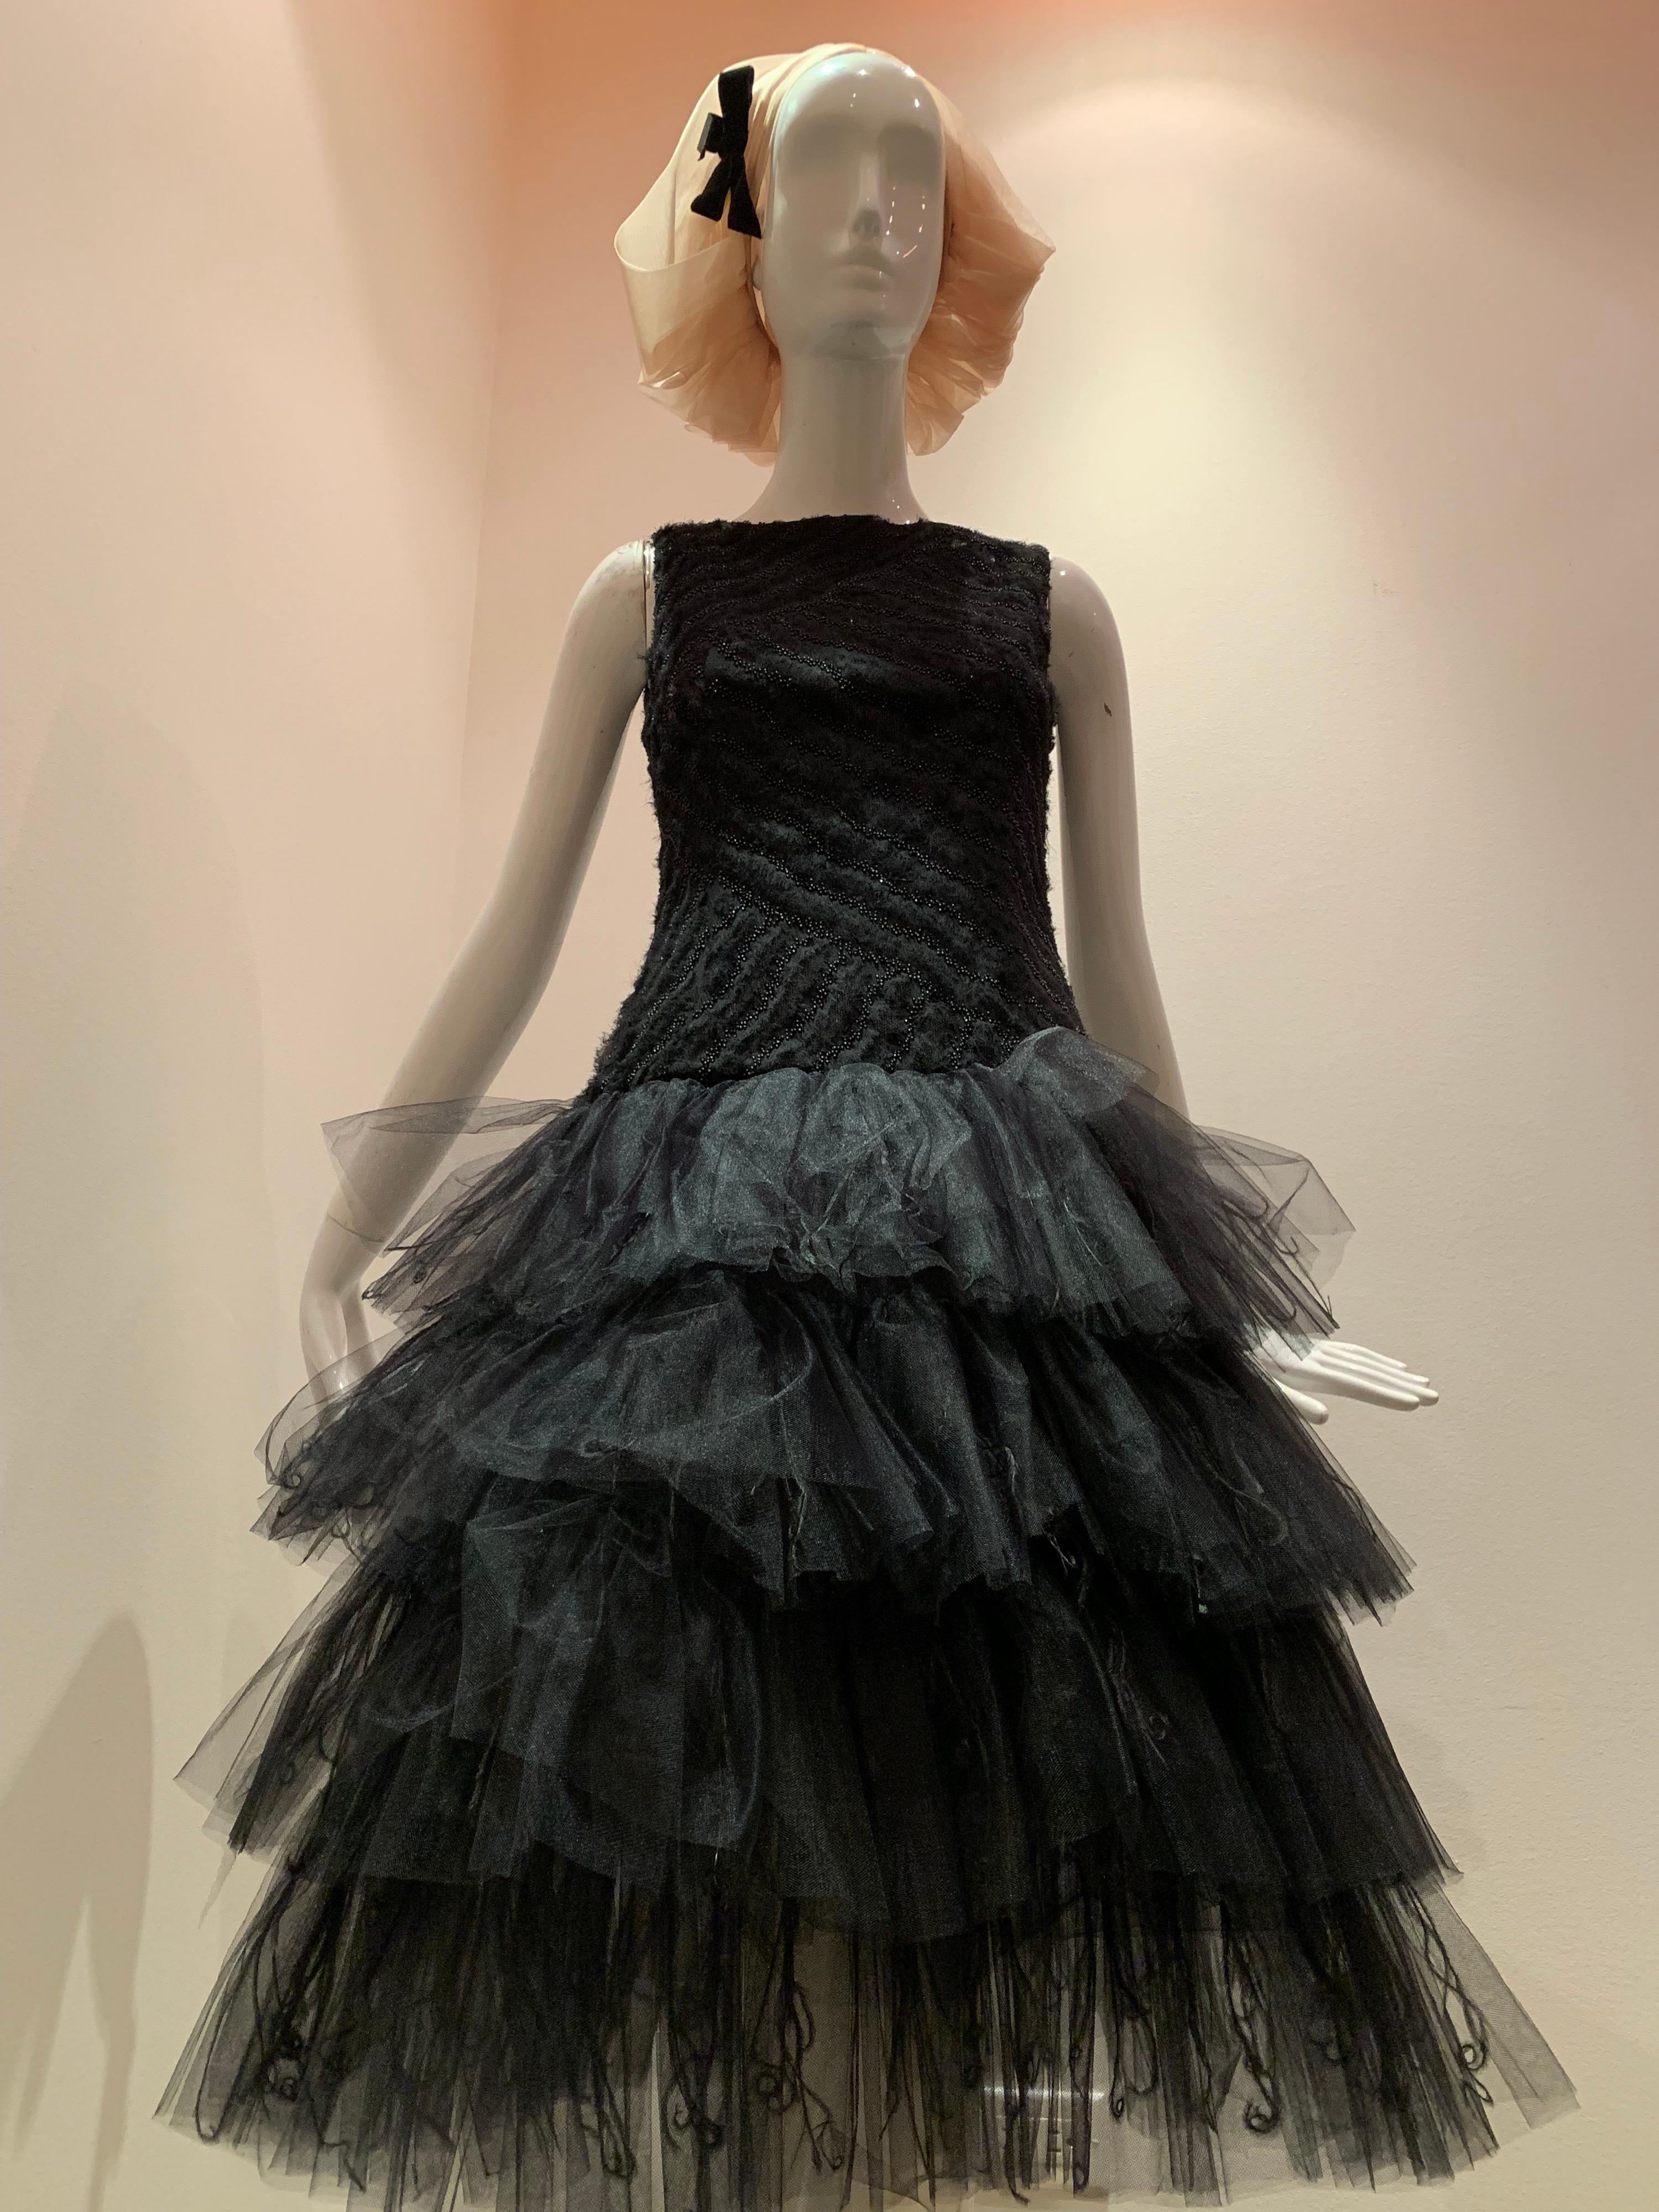 A contemporary Oscar de la Renta ballet-inspired dropped-waist, sleeveless black cocktail dress with multi-tiered tulle skirt embellished with curled ostrich feathers. The ballet neck bodice is embellished with beaded diagonal stripes and gathered